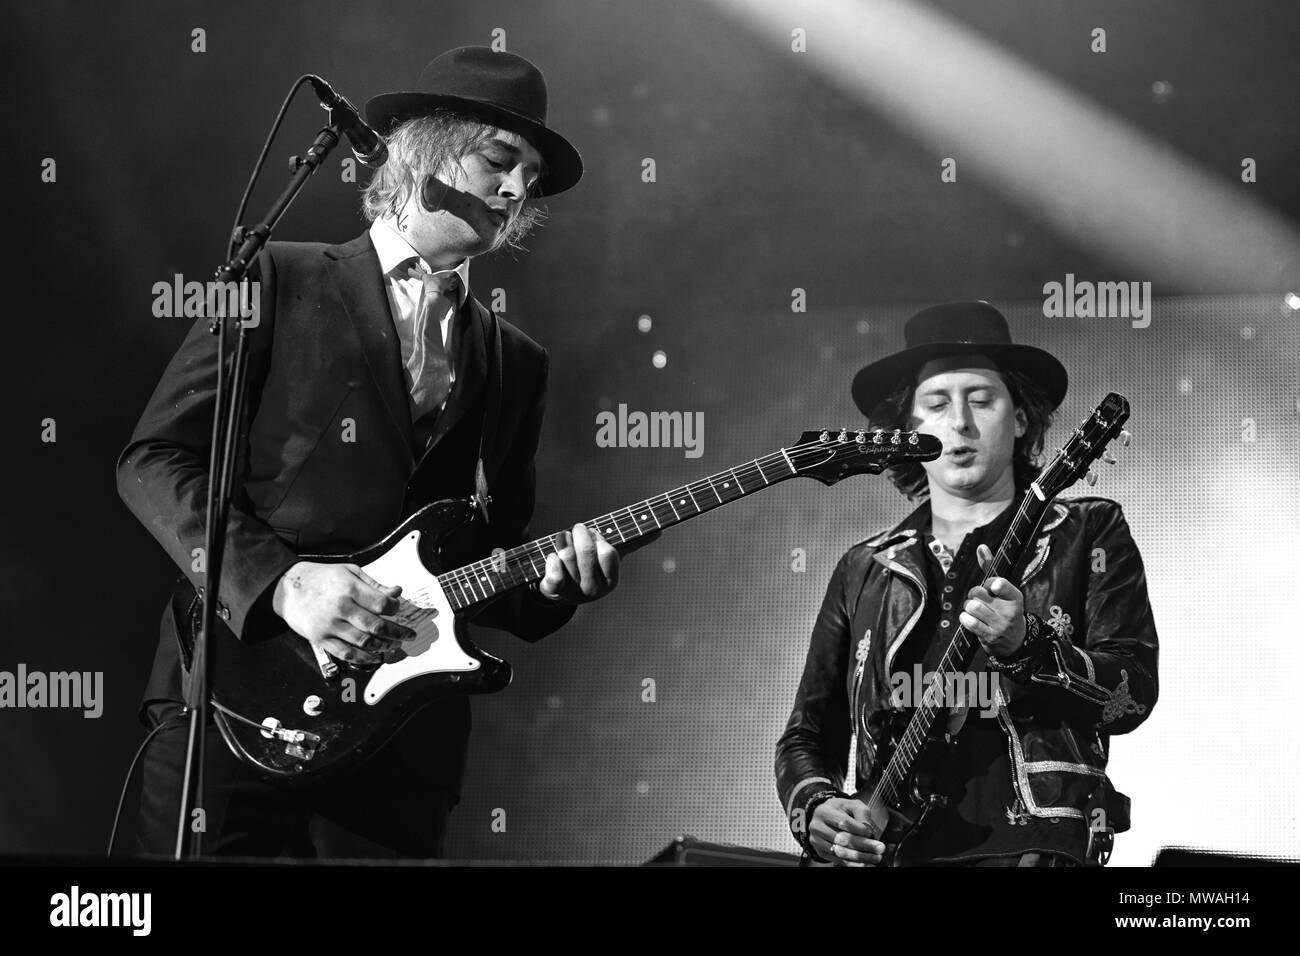 Pete Doherty and Carl Barât of The Libertines live onstage in Glasgow, Scotland in 2016. Peter Doherty and Carl Barat, The Libertines onstage. B&W. Stock Photo